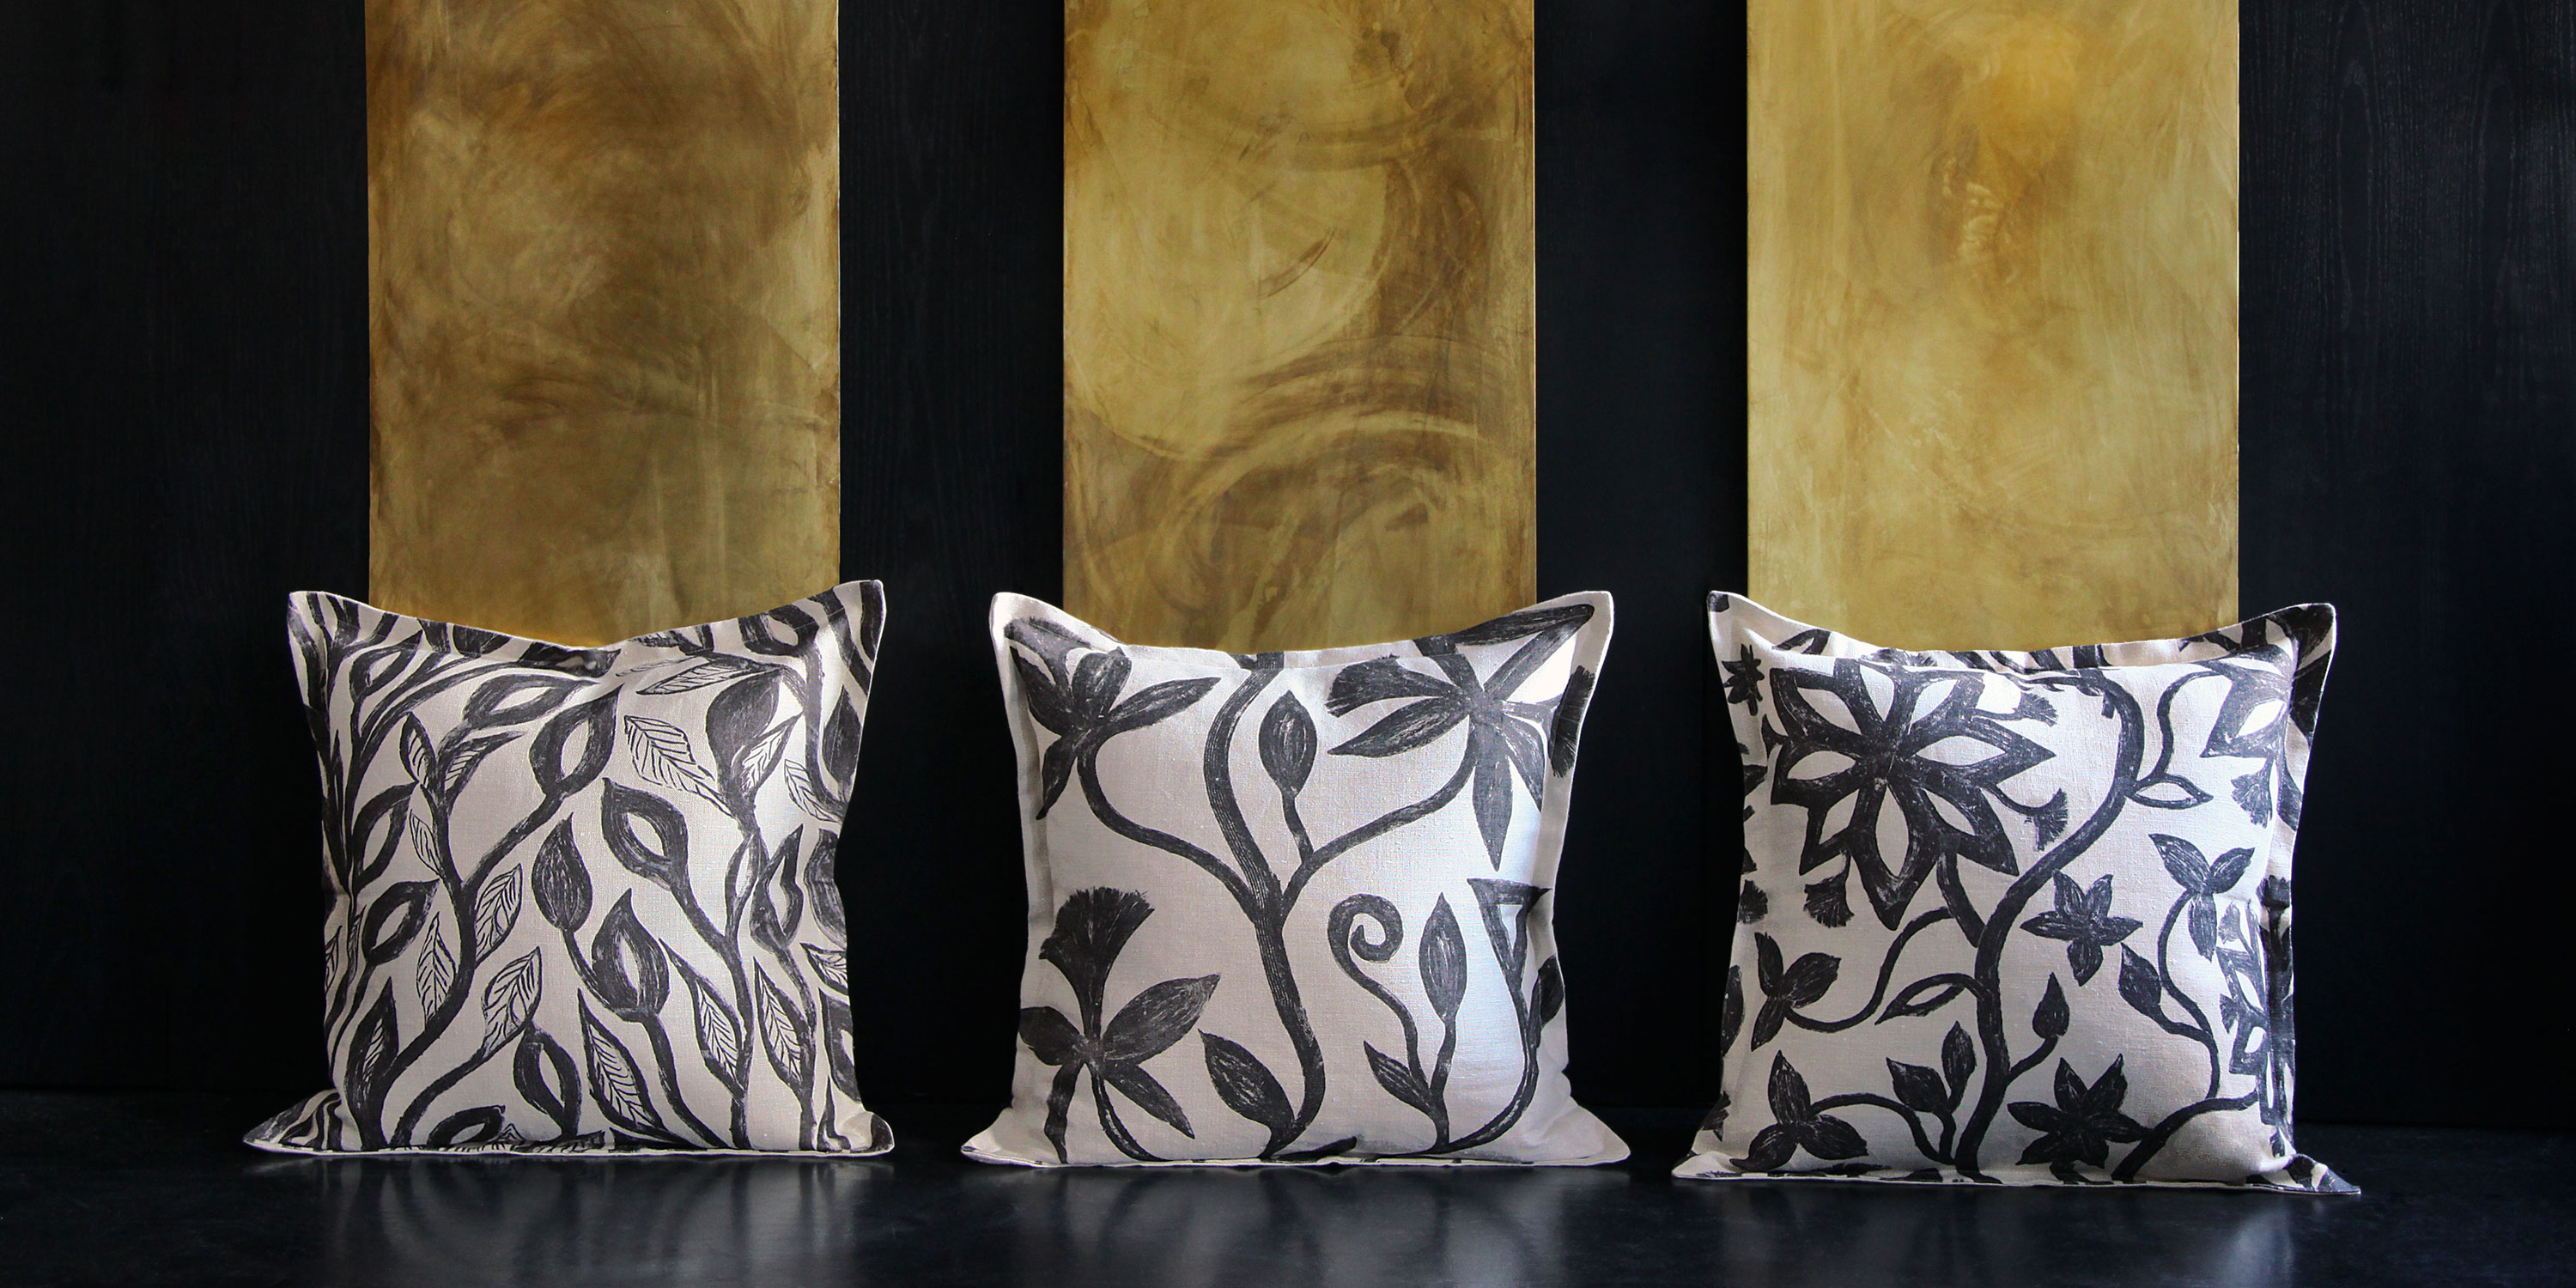 khovar linen throw pillows, printed in decorative bold neutral patterns.